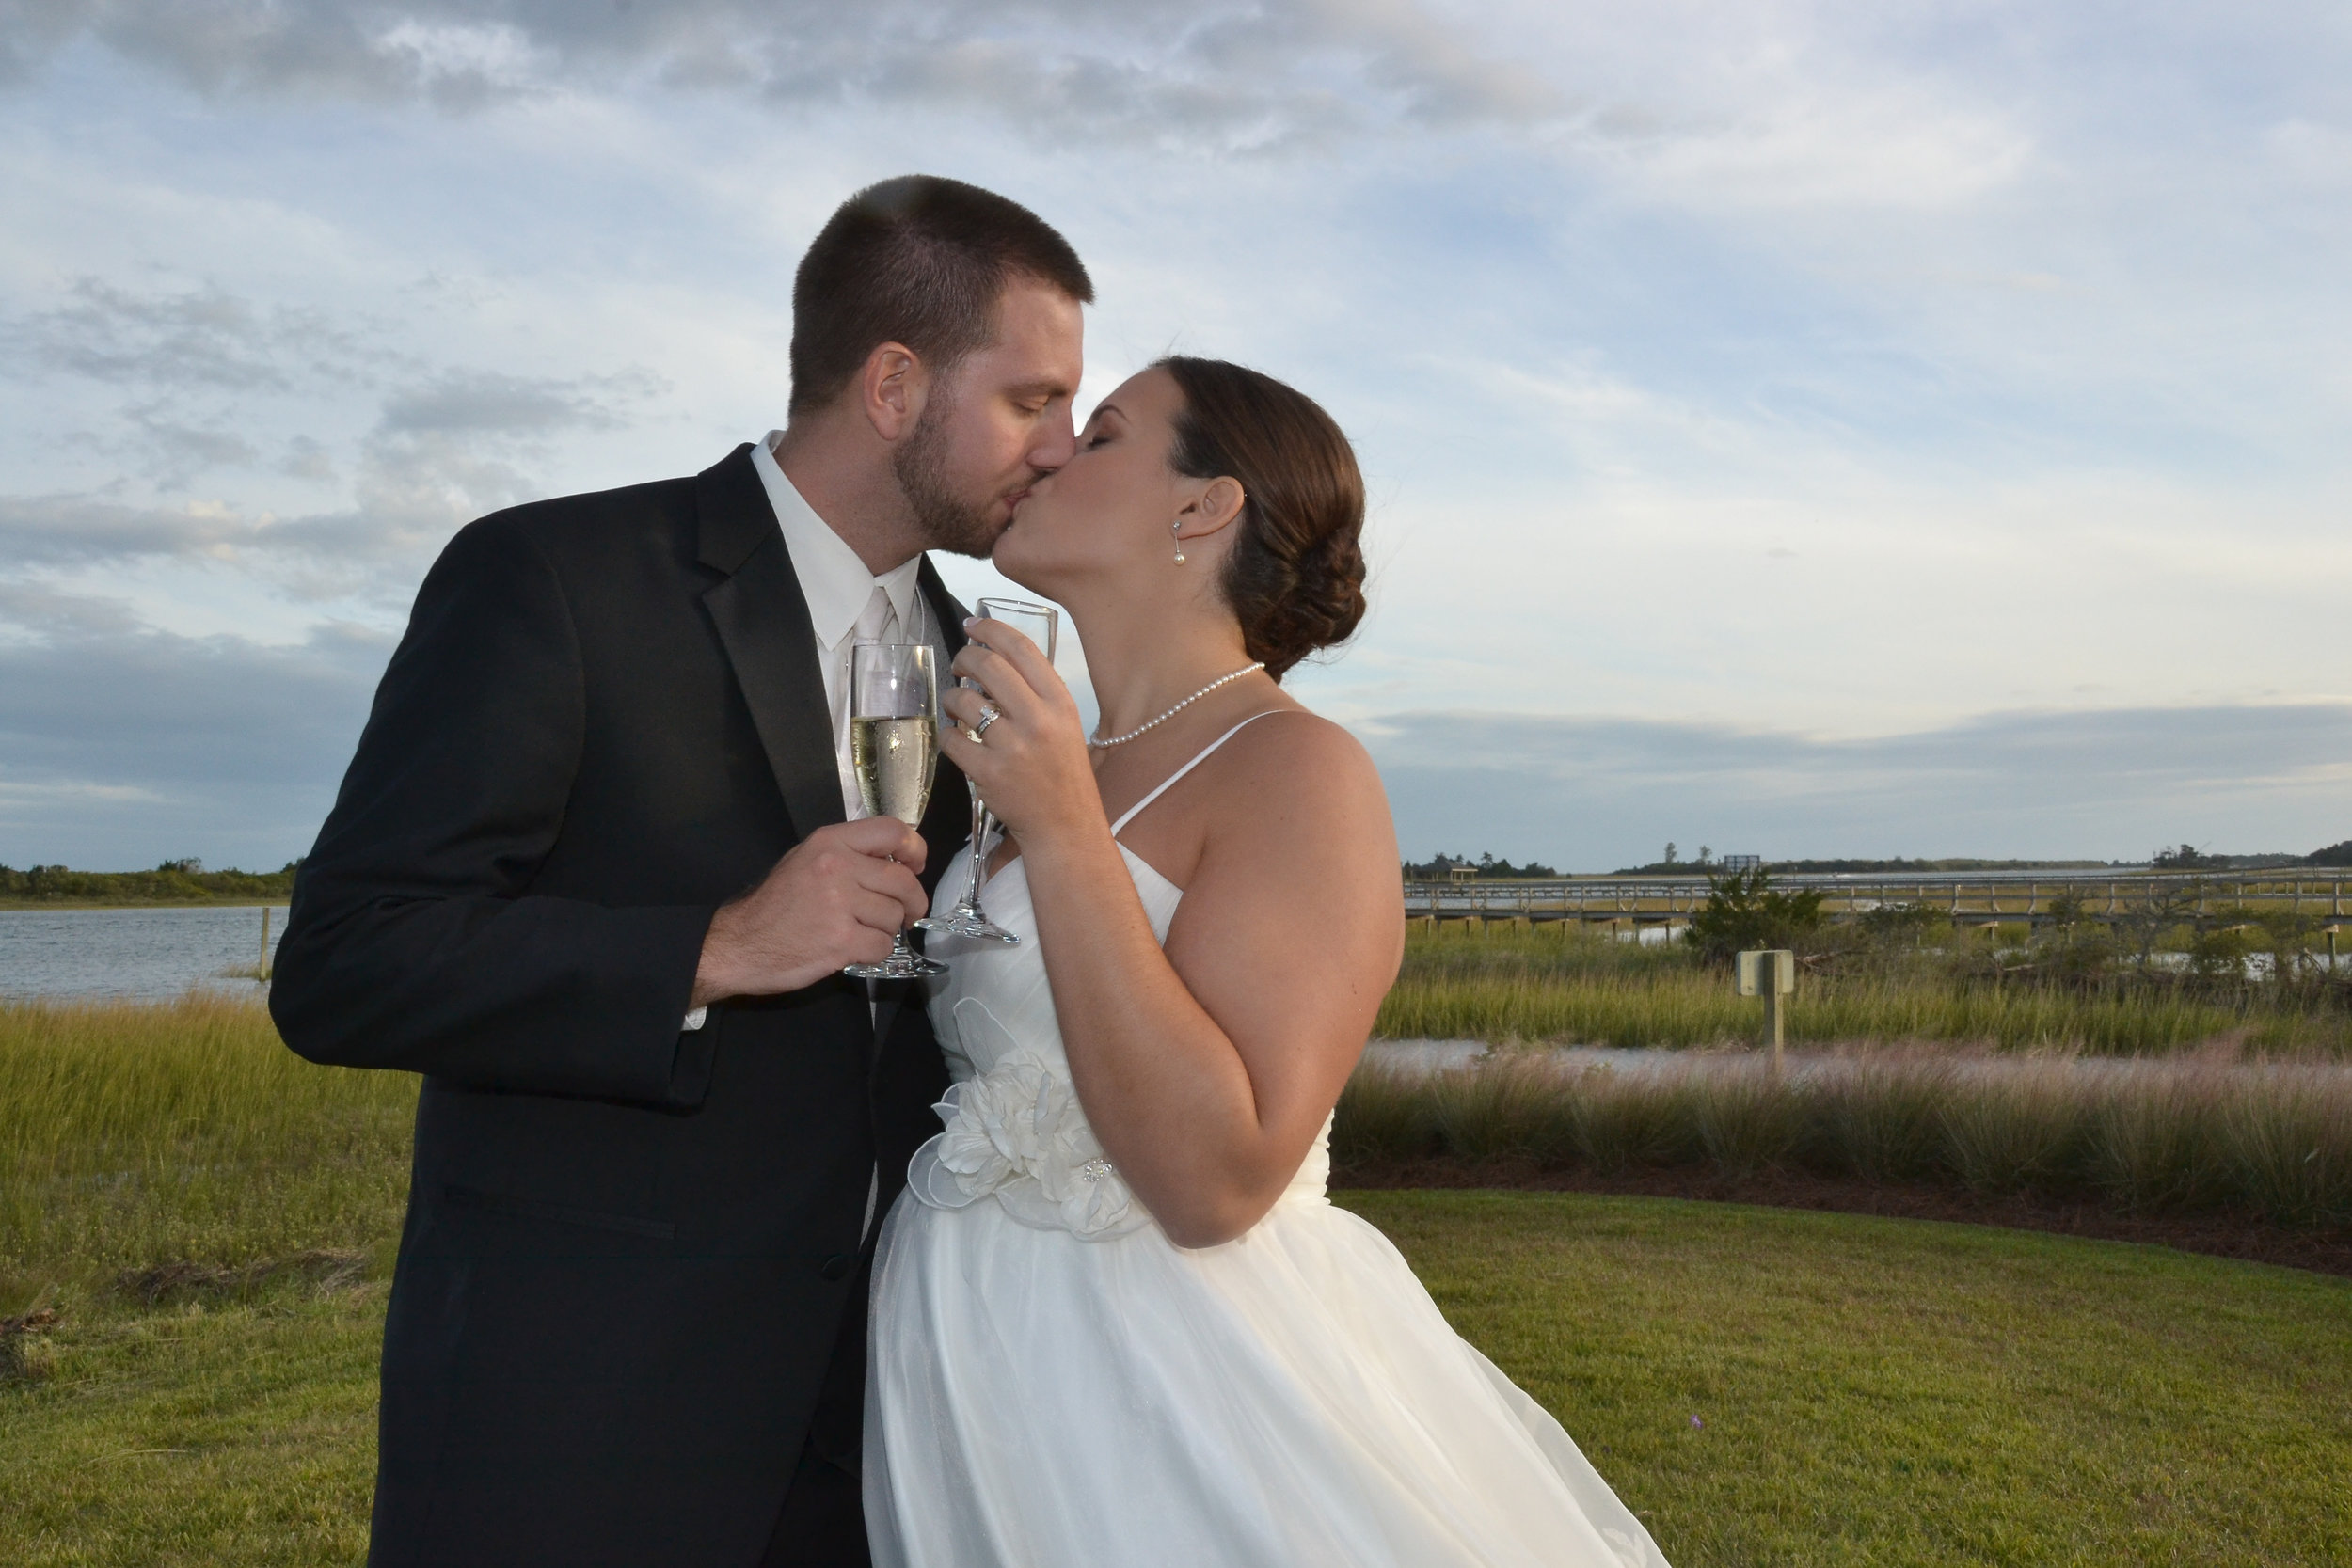 A toast and a kiss on the Intracoastal Waterway.